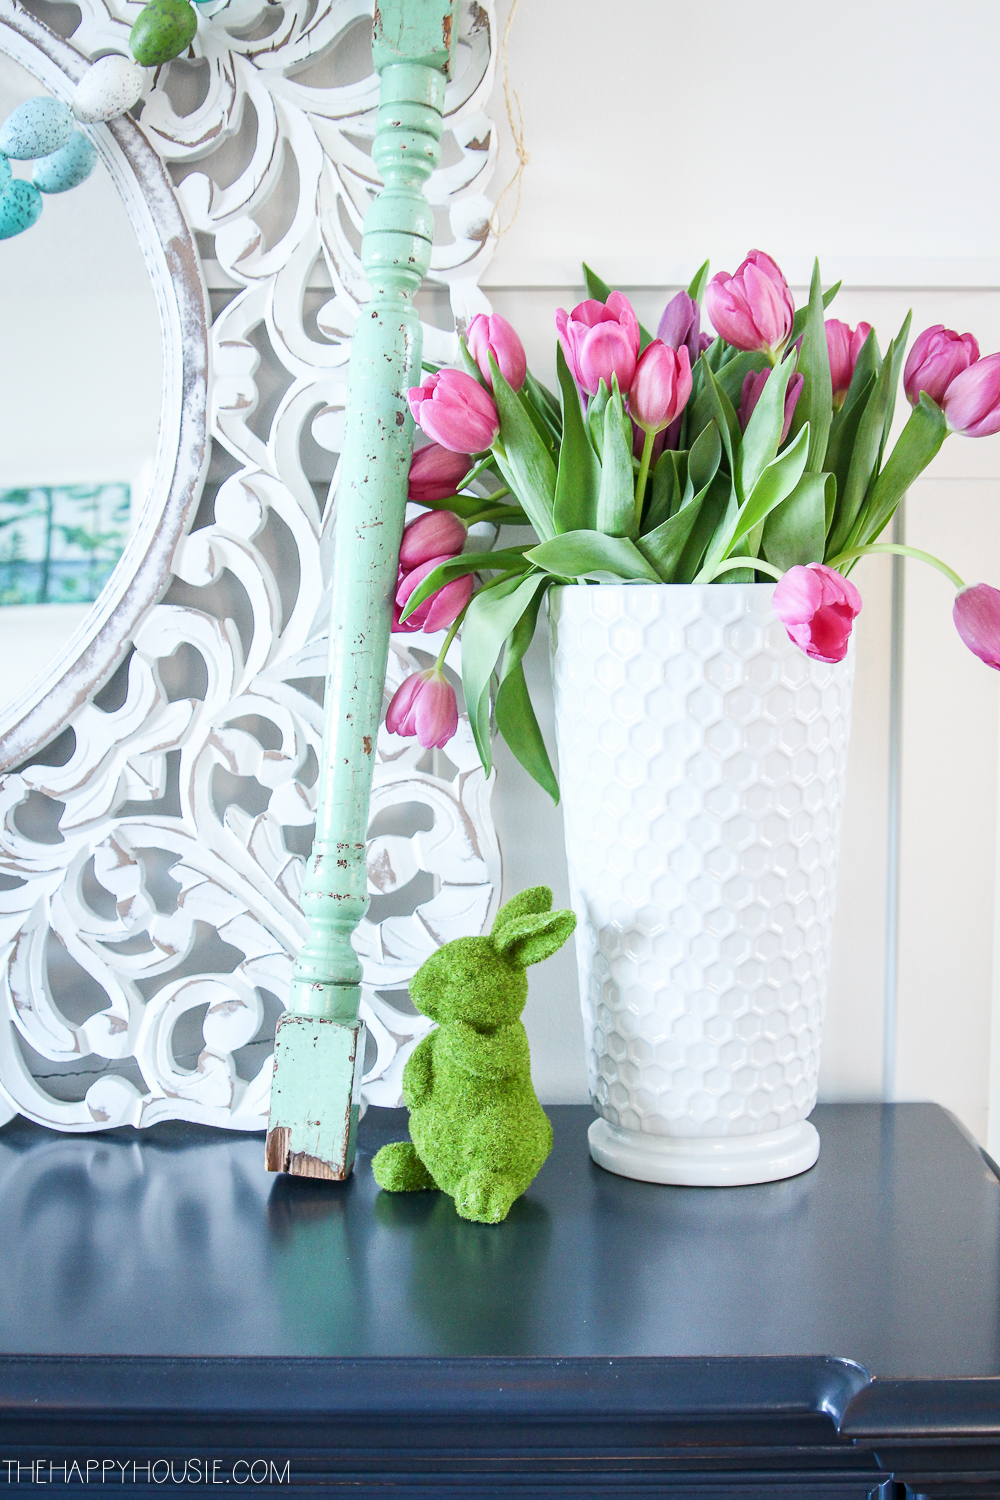 How to Style a Simple Spring Mantel or Vignette